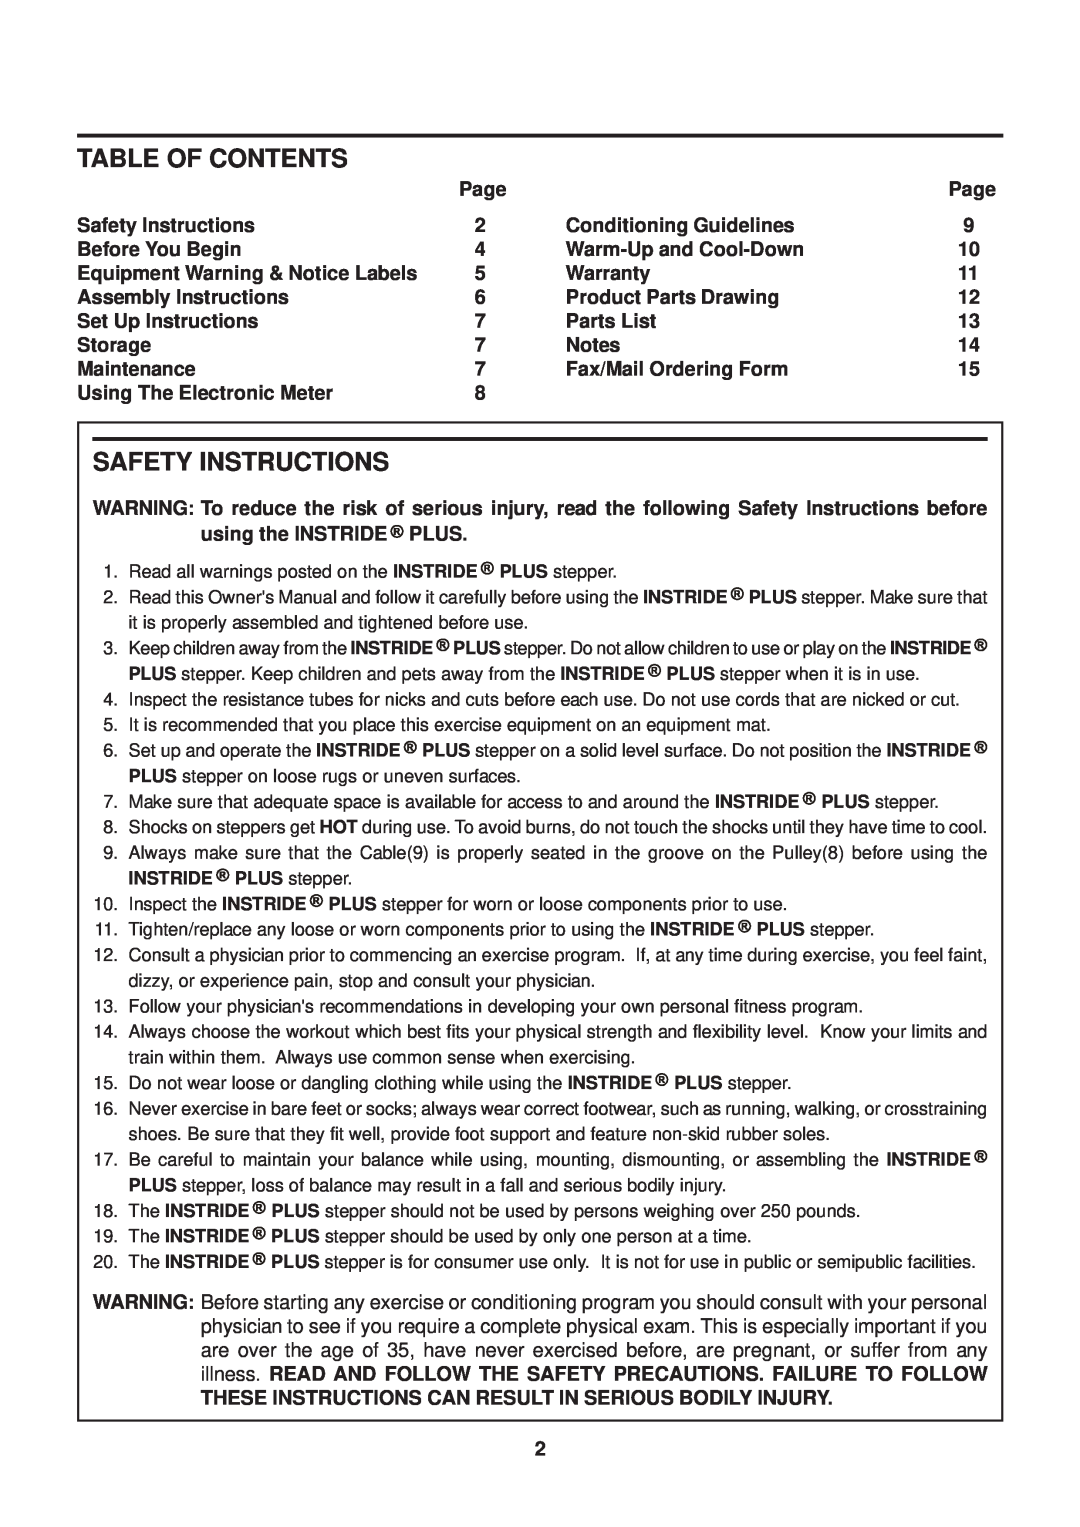 Stamina Products 40-0046A owner manual Table Of Contents, Safety Instructions 